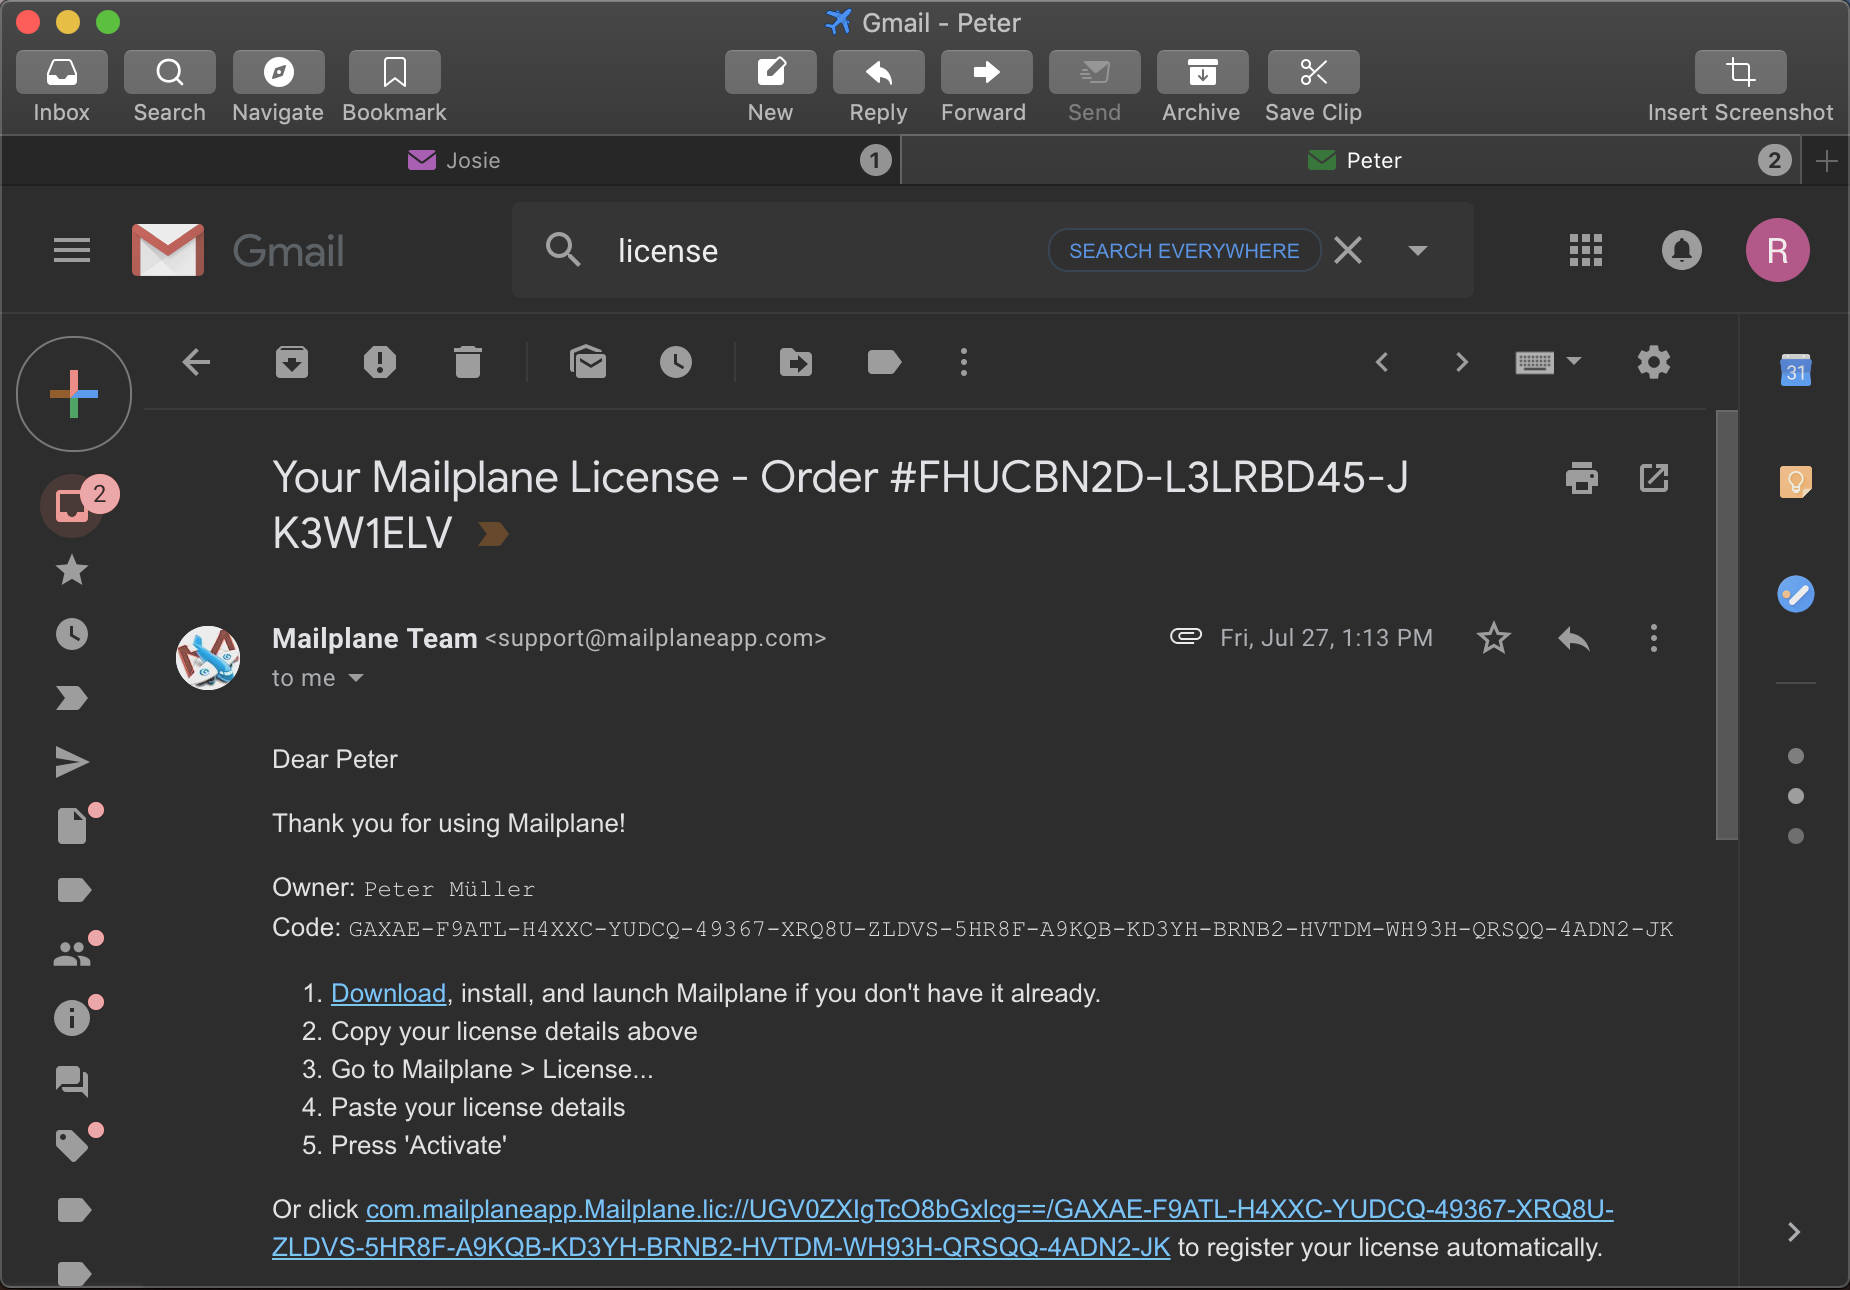 mailplane link opens browser but not the page